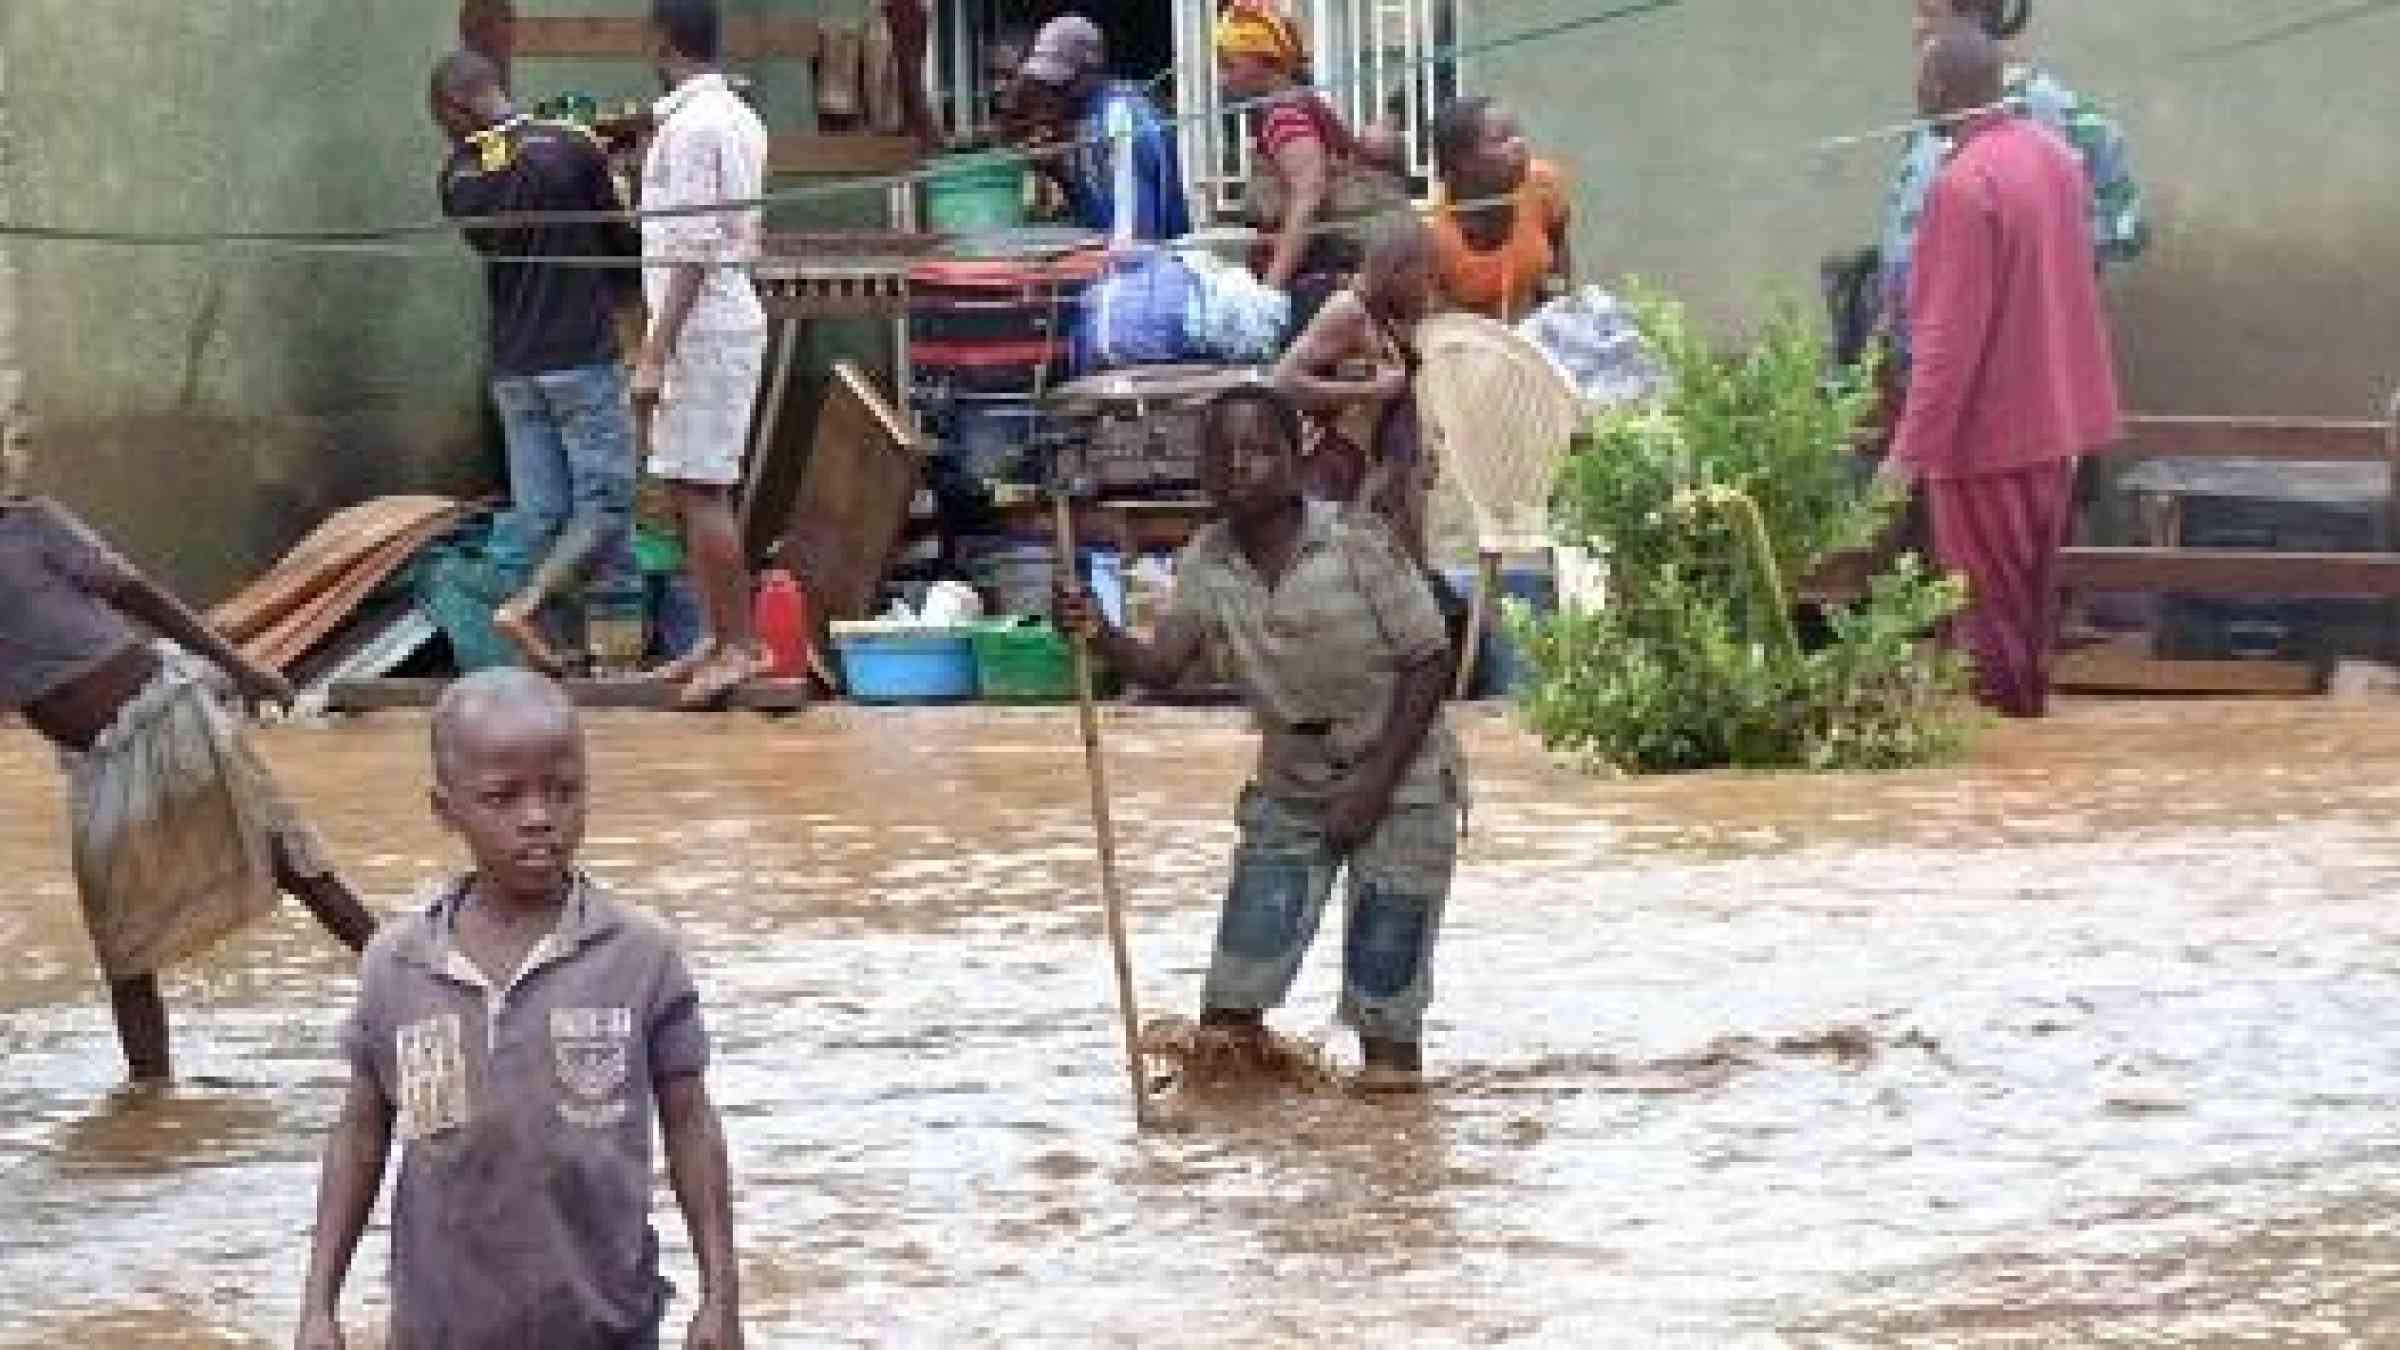 Flooding is one of the main natural hazards affecting Central African countries. Here, residents evacuate in the Mutakura district of Burundi's capital Bujumbura, in February 2014 (Photo: Desire Nimubona/IRIN)